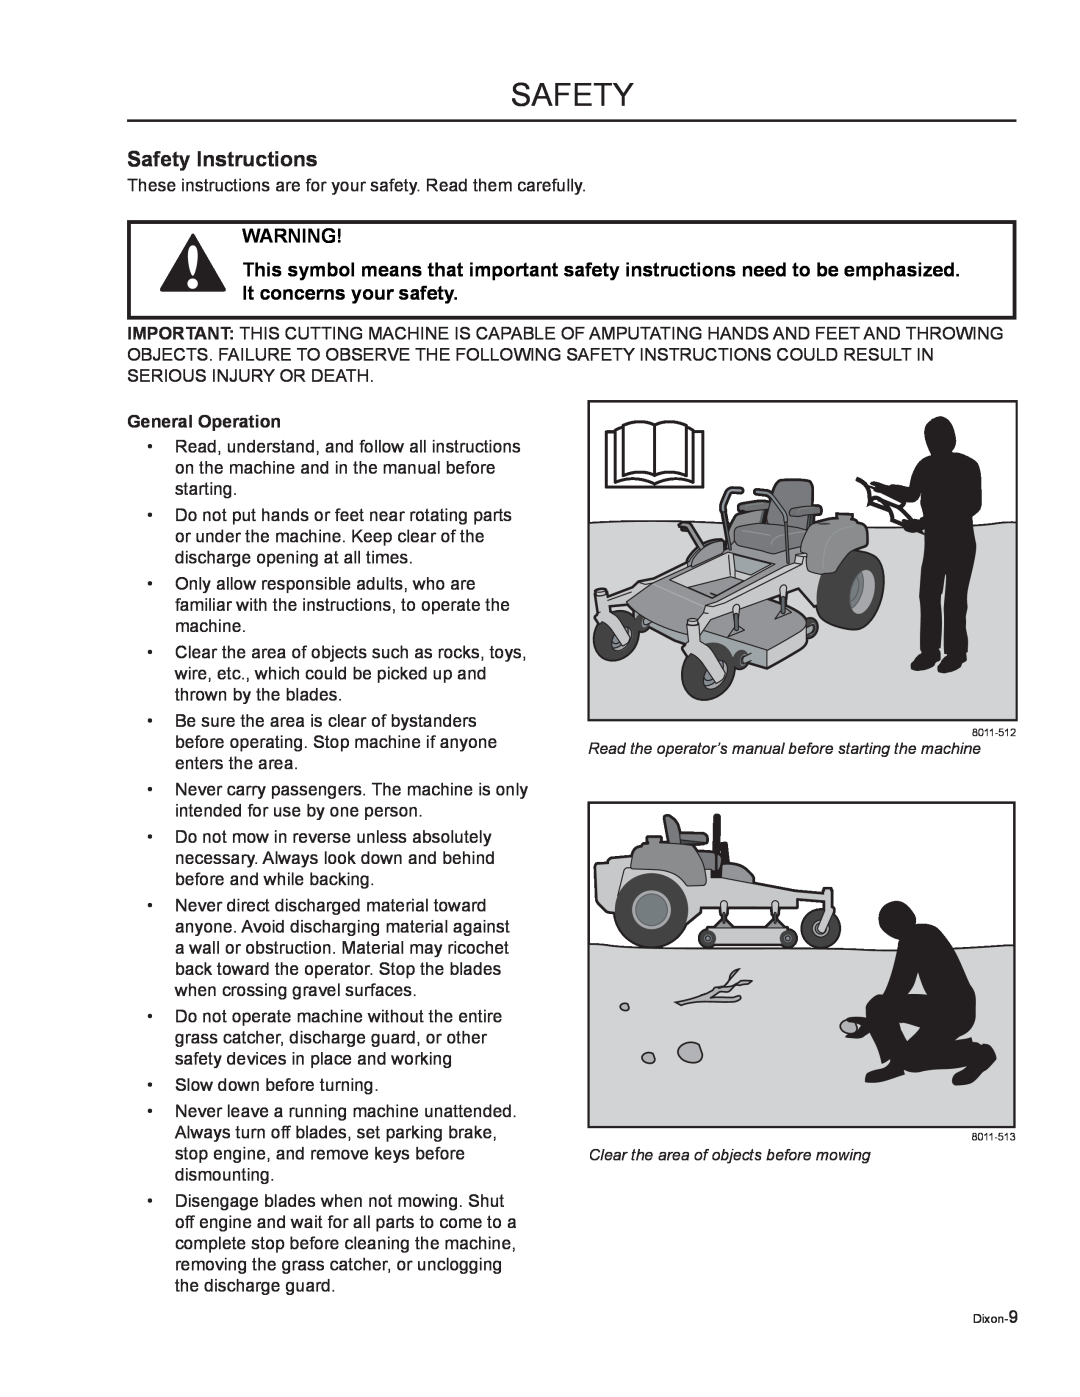 Dixon 968999723, Ram Ultra 72, Ram Ultra 50, Ram Ultra 27, Ram Ultra 60, Ram Ultra 25, 968999724 manual Safety Instructions 